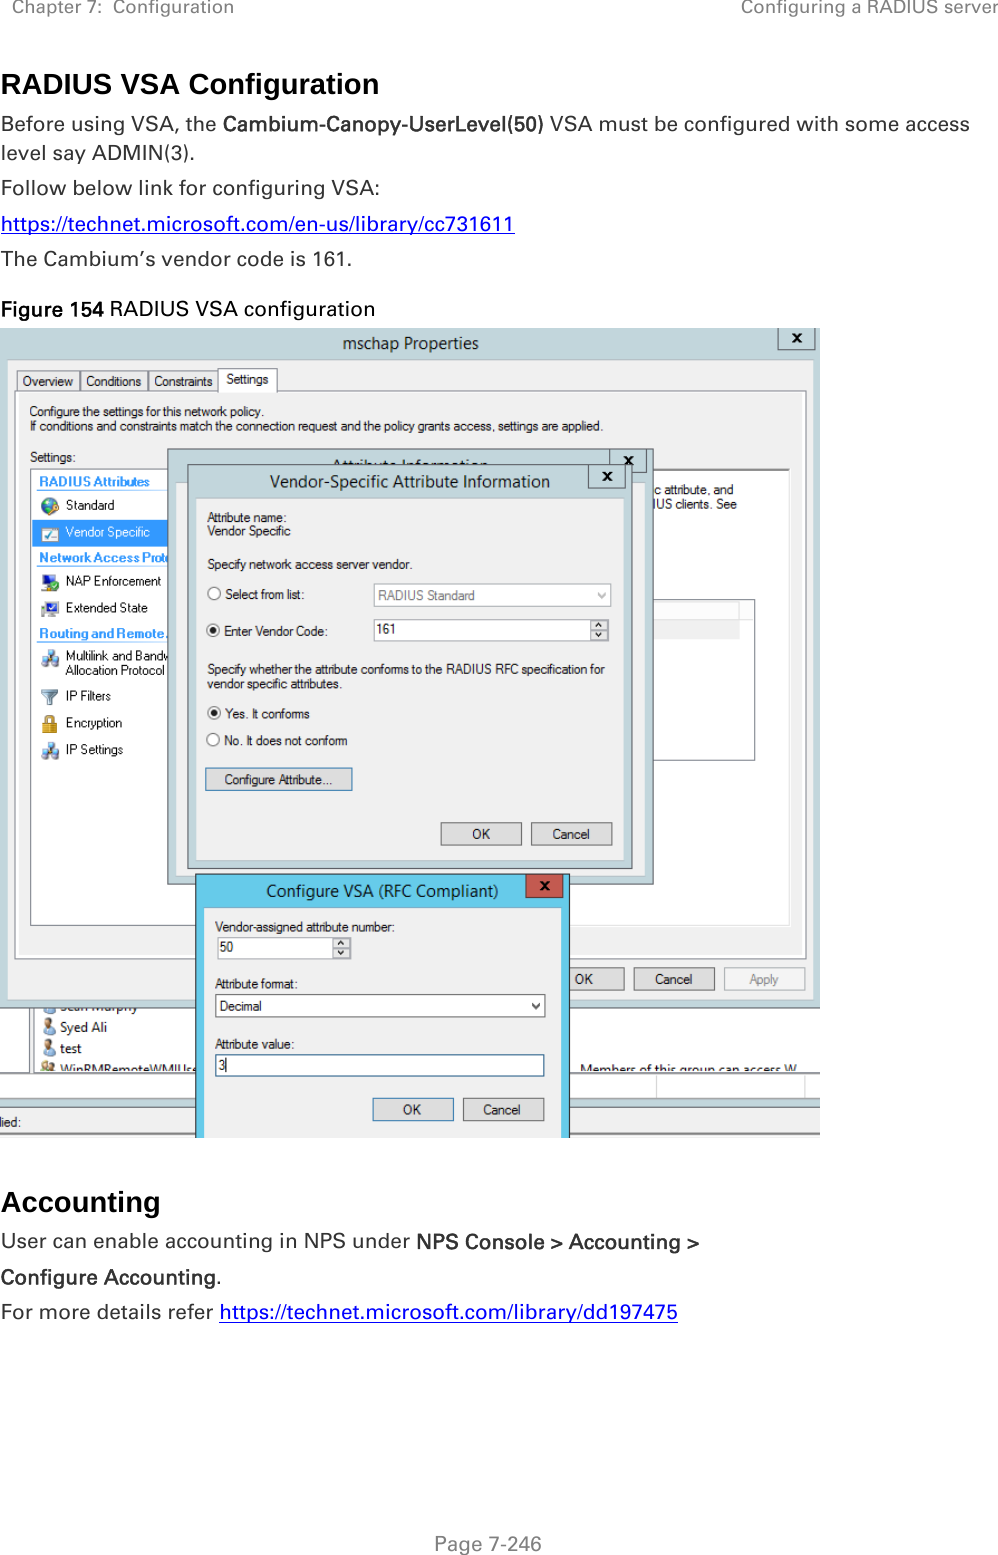 Chapter 7:  Configuration  Configuring a RADIUS server   Page 7-246 RADIUS VSA Configuration Before using VSA, the Cambium-Canopy-UserLevel(50) VSA must be configured with some access level say ADMIN(3). Follow below link for configuring VSA: https://technet.microsoft.com/en-us/library/cc731611  The Cambium’s vendor code is 161. Figure 154 RADIUS VSA configuration   Accounting User can enable accounting in NPS under NPS Console &gt; Accounting &gt;  Configure Accounting. For more details refer https://technet.microsoft.com/library/dd197475   